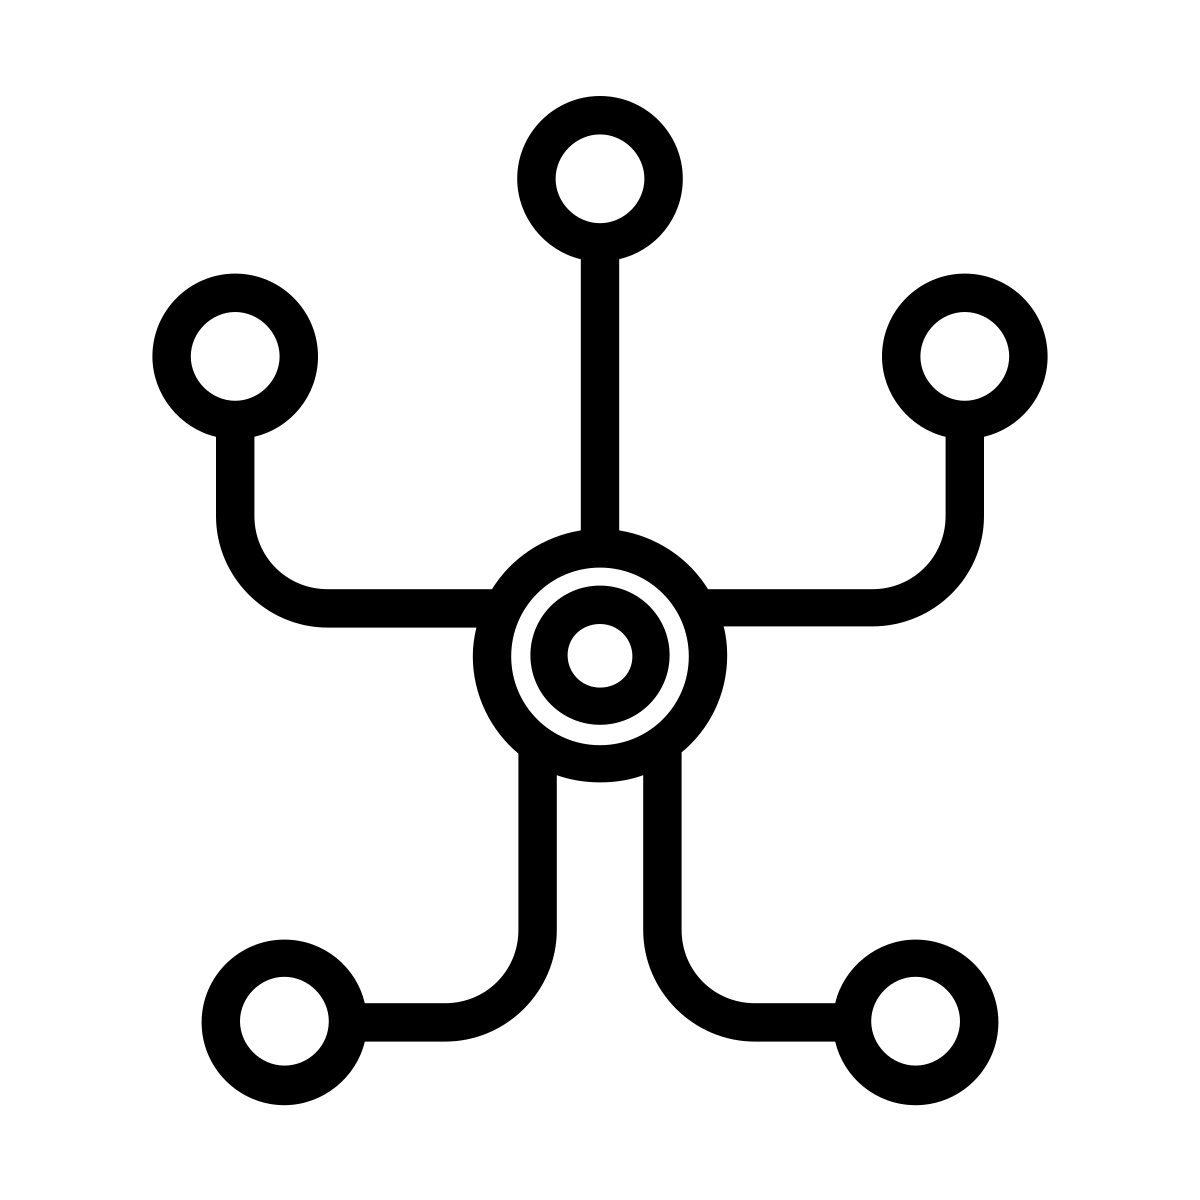 An icon representing a system, with a large two layer dot in the center, and multiple single dots connected outside.